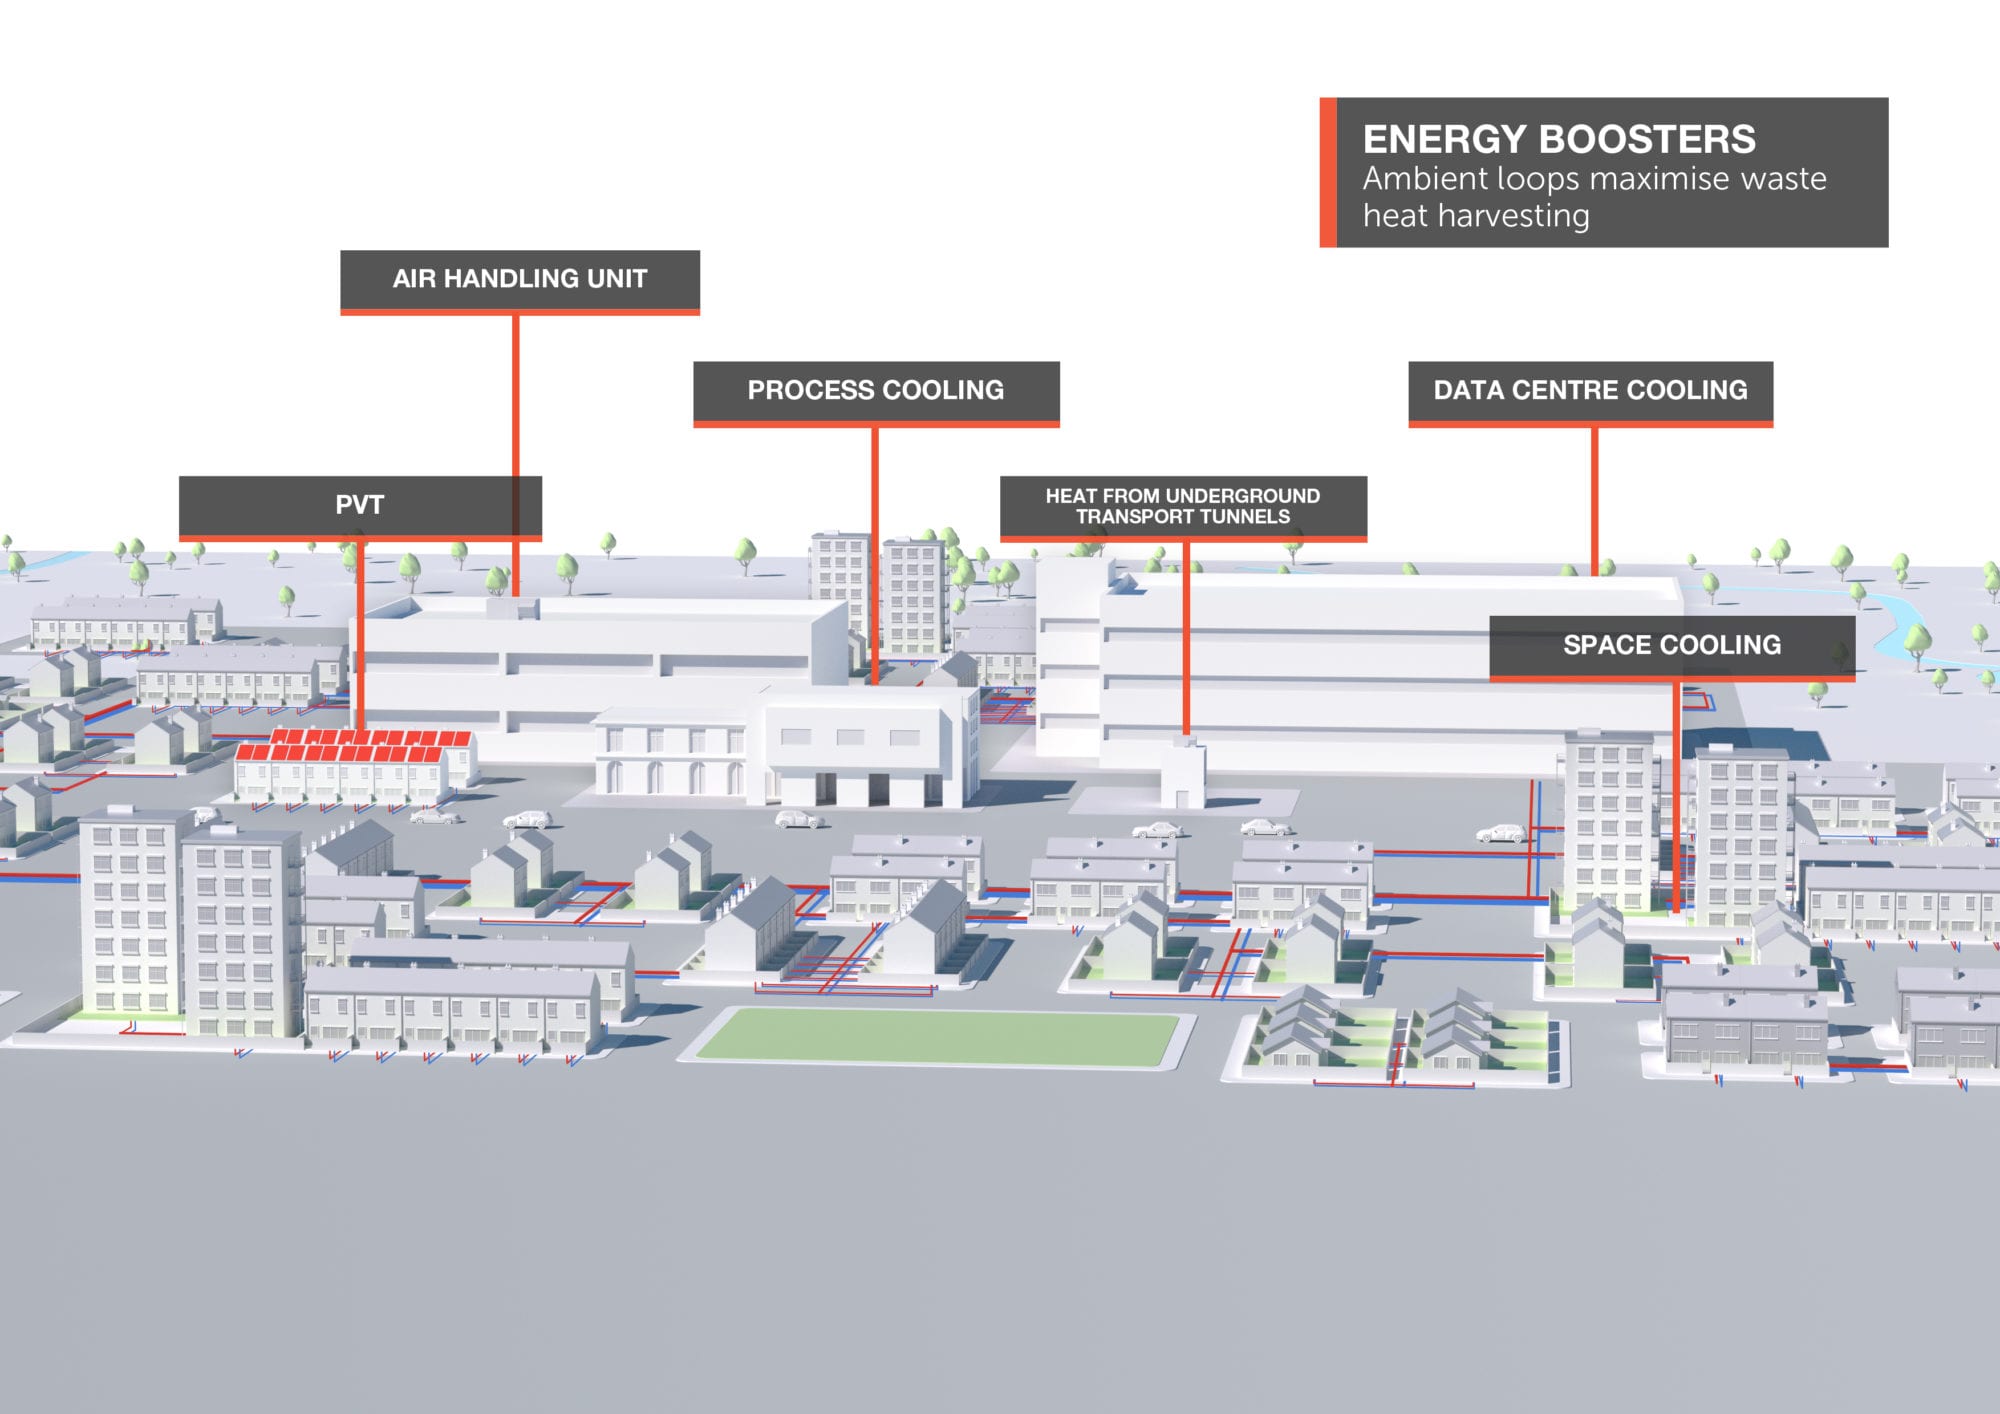 Fifth Generation District Heating with Shared Ground Loop Arrays using energy boosters and waste heat